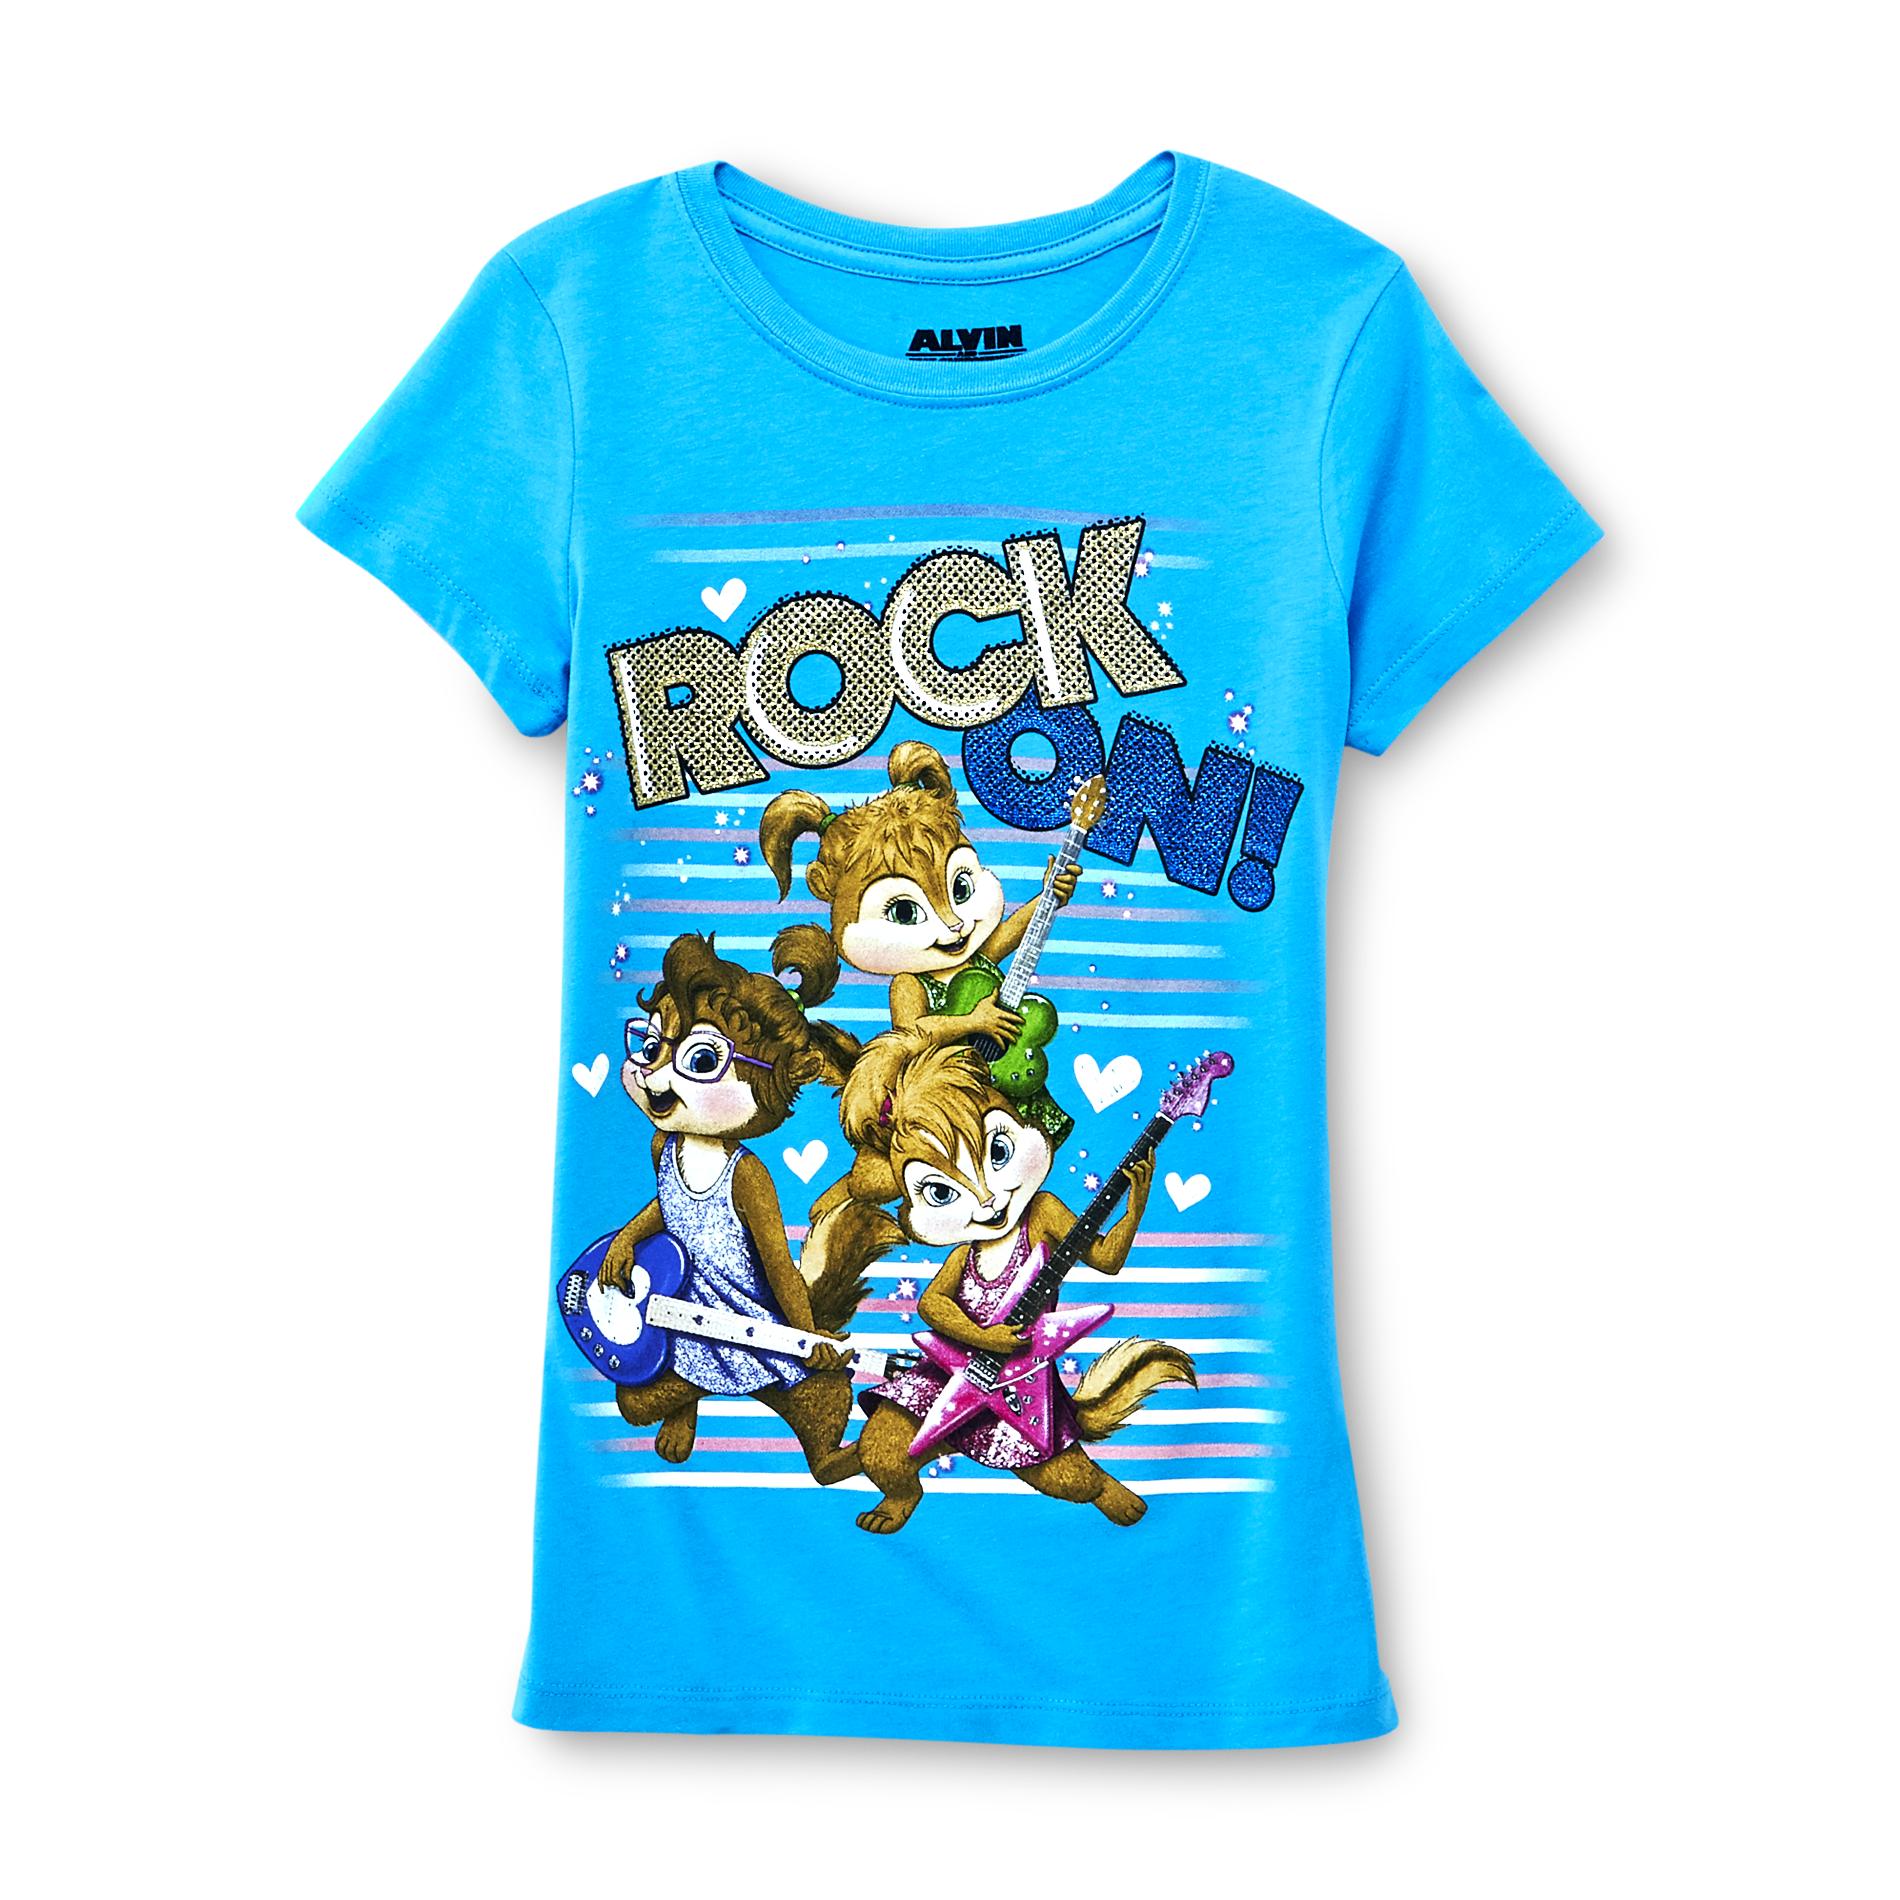 20th Century Fox Alvin & the Chipmunks Girl's Top - Chipettes